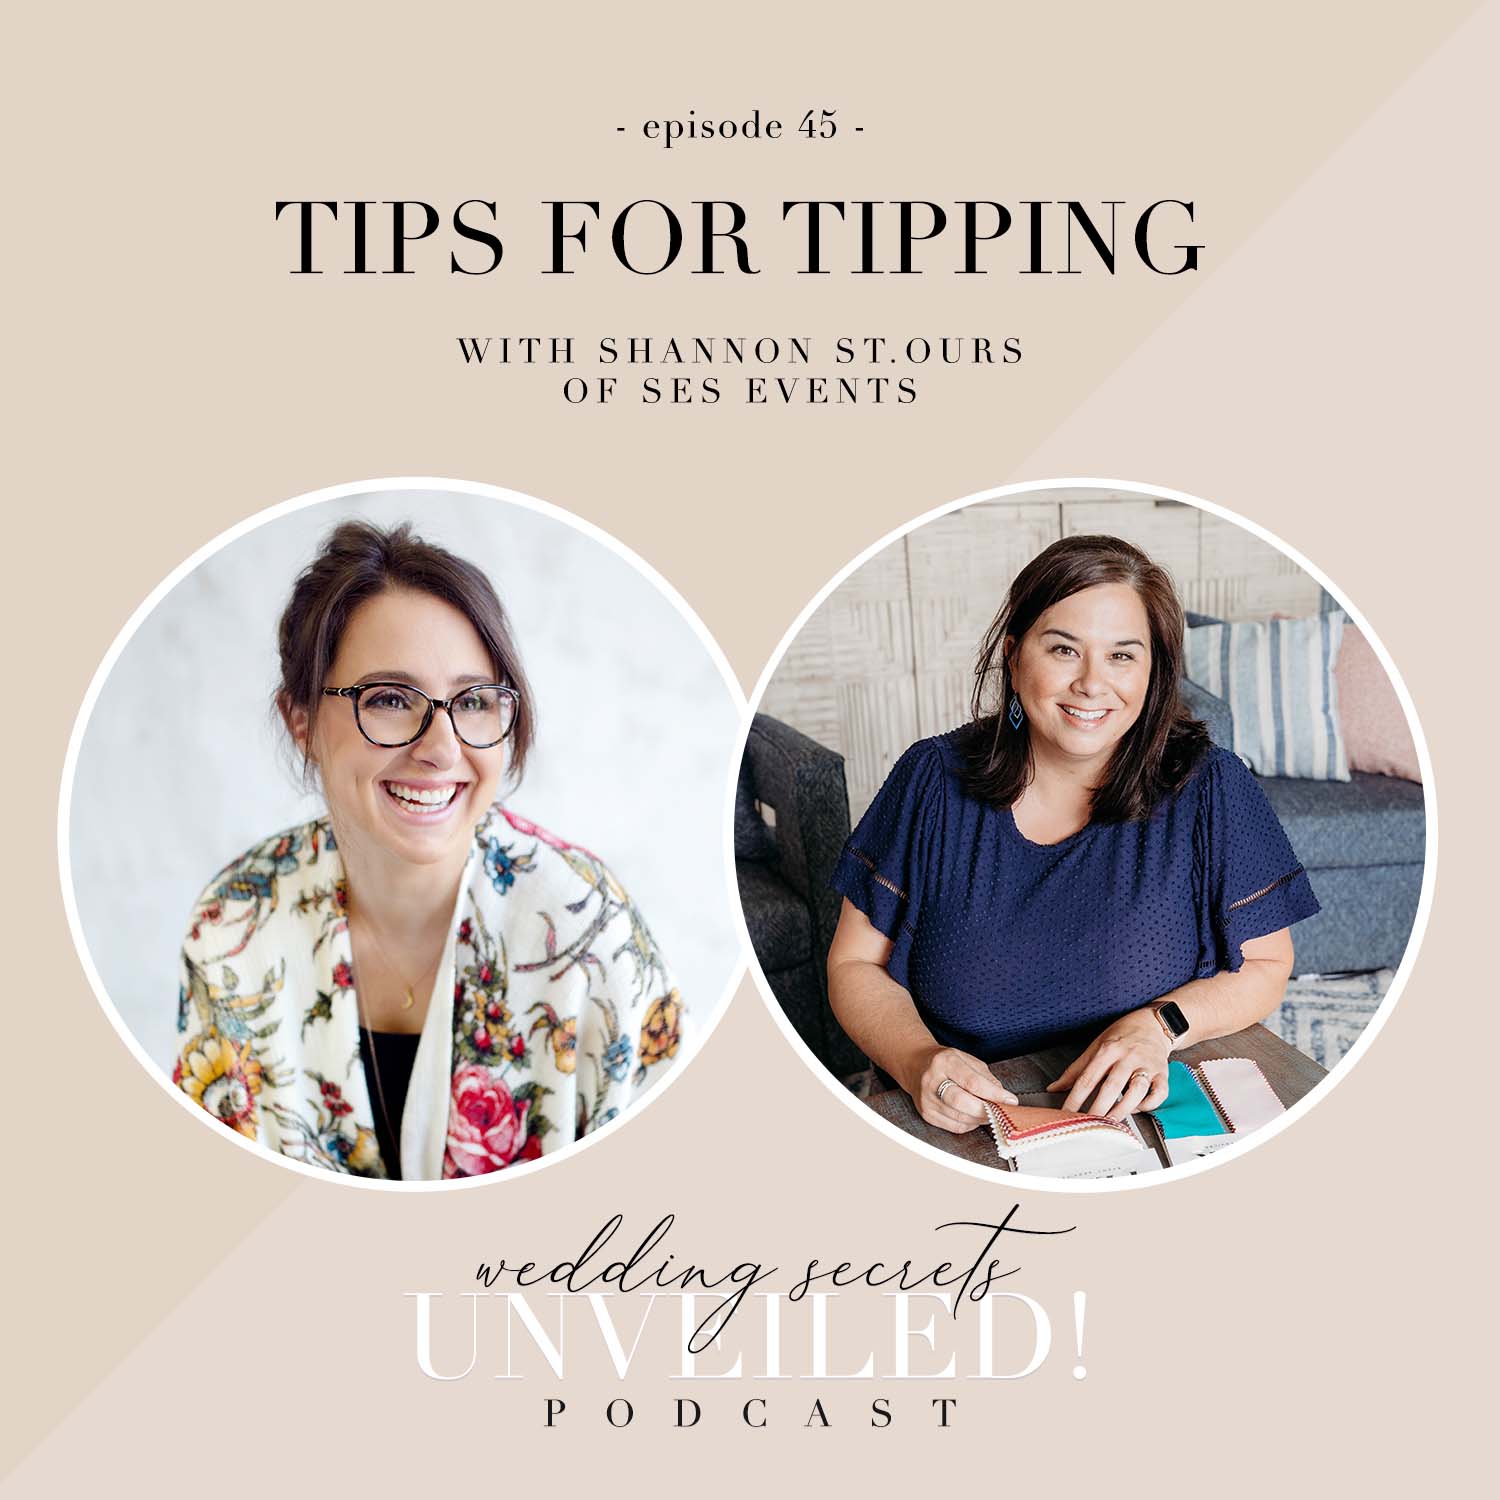 Tips for Tipping on your wedding day: how to prepare tips for your vendors shared by Shannon St. Ours on Wedding Secrets Unveiled! podcast